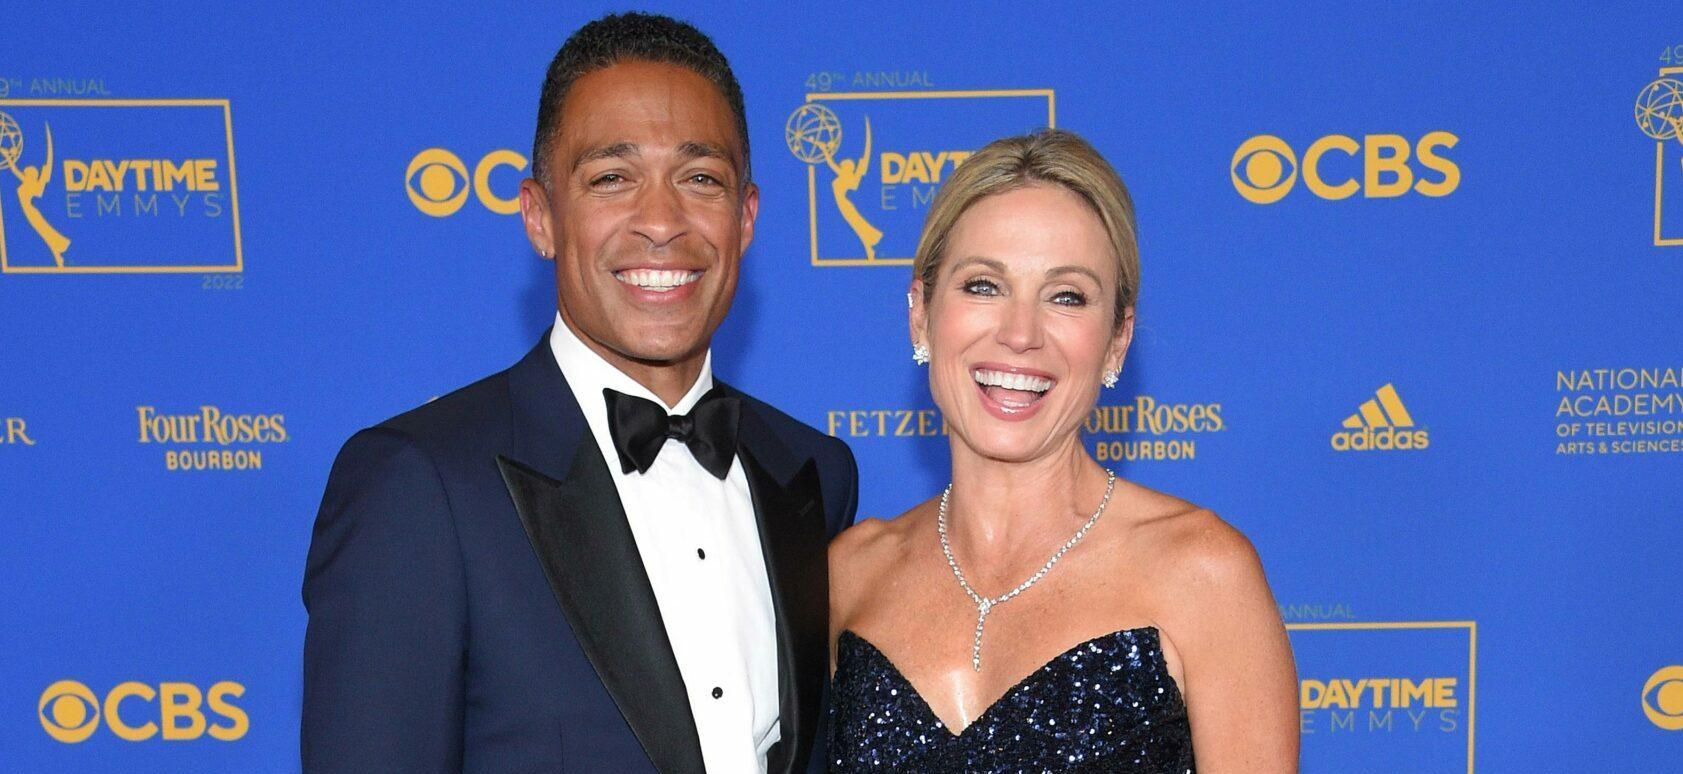 Amy Robach & T.J. Holmes Reveal They Have ‘Big Blowout’ Fights And Are Unsure About Marriage